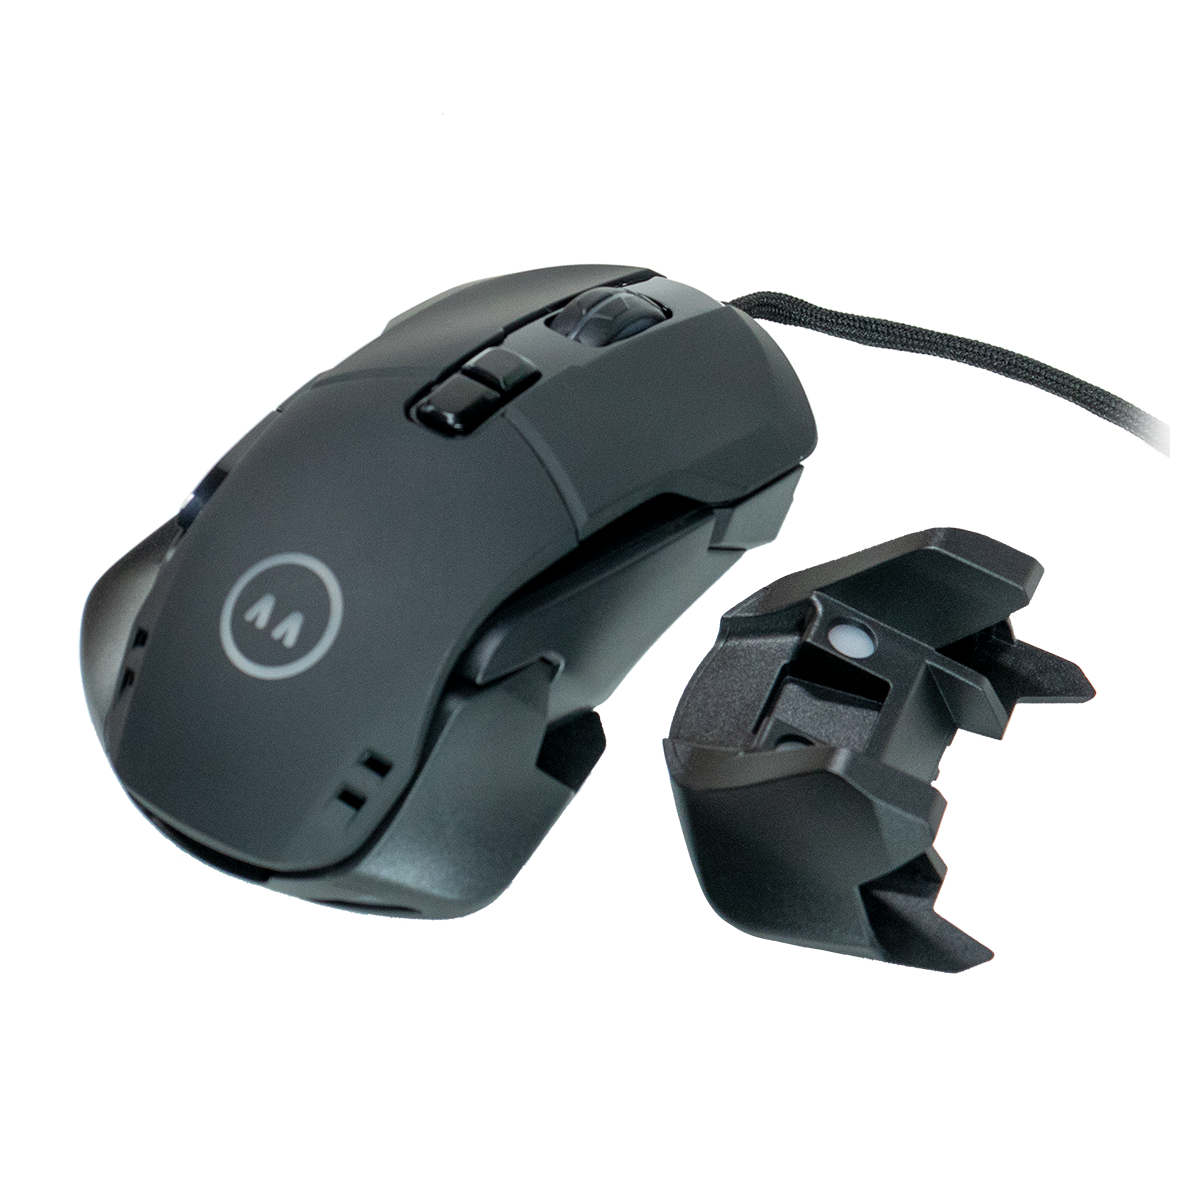 Mouse shown with the extra base